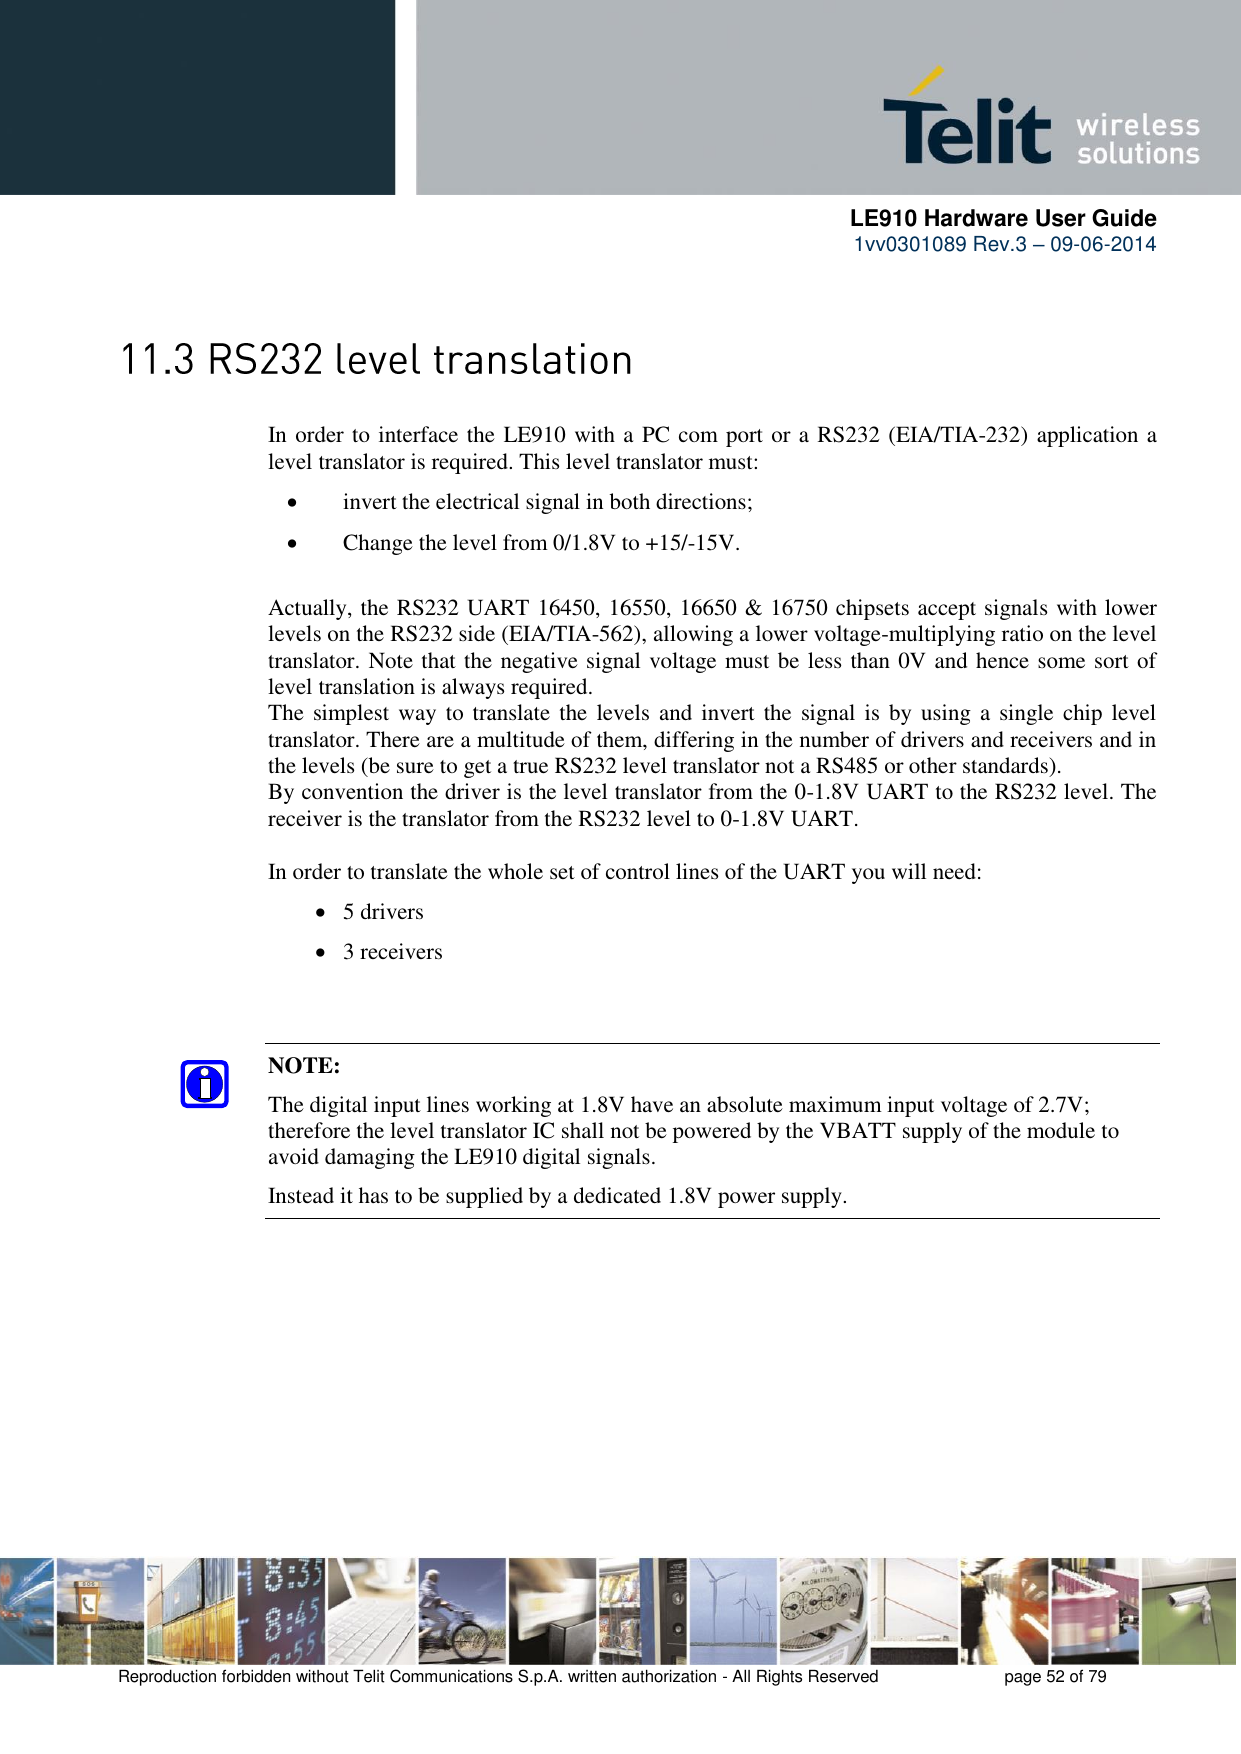      LE910 Hardware User Guide 1vv0301089 Rev.3 – 09-06-2014    Reproduction forbidden without Telit Communications S.p.A. written authorization - All Rights Reserved    page 52 of 79    In order to interface the LE910 with a PC com port or a RS232 (EIA/TIA-232) application a level translator is required. This level translator must:  invert the electrical signal in both directions;  Change the level from 0/1.8V to +15/-15V.  Actually, the RS232 UART 16450, 16550, 16650 &amp; 16750 chipsets accept signals with lower levels on the RS232 side (EIA/TIA-562), allowing a lower voltage-multiplying ratio on the level translator. Note that the negative signal voltage must be less than 0V and hence some sort of level translation is always required.  The simplest way  to translate the  levels and invert the  signal is by  using a  single chip level translator. There are a multitude of them, differing in the number of drivers and receivers and in the levels (be sure to get a true RS232 level translator not a RS485 or other standards). By convention the driver is the level translator from the 0-1.8V UART to the RS232 level. The receiver is the translator from the RS232 level to 0-1.8V UART.  In order to translate the whole set of control lines of the UART you will need:  5 drivers  3 receivers   NOTE: The digital input lines working at 1.8V have an absolute maximum input voltage of 2.7V; therefore the level translator IC shall not be powered by the VBATT supply of the module to avoid damaging the LE910 digital signals. Instead it has to be supplied by a dedicated 1.8V power supply.   